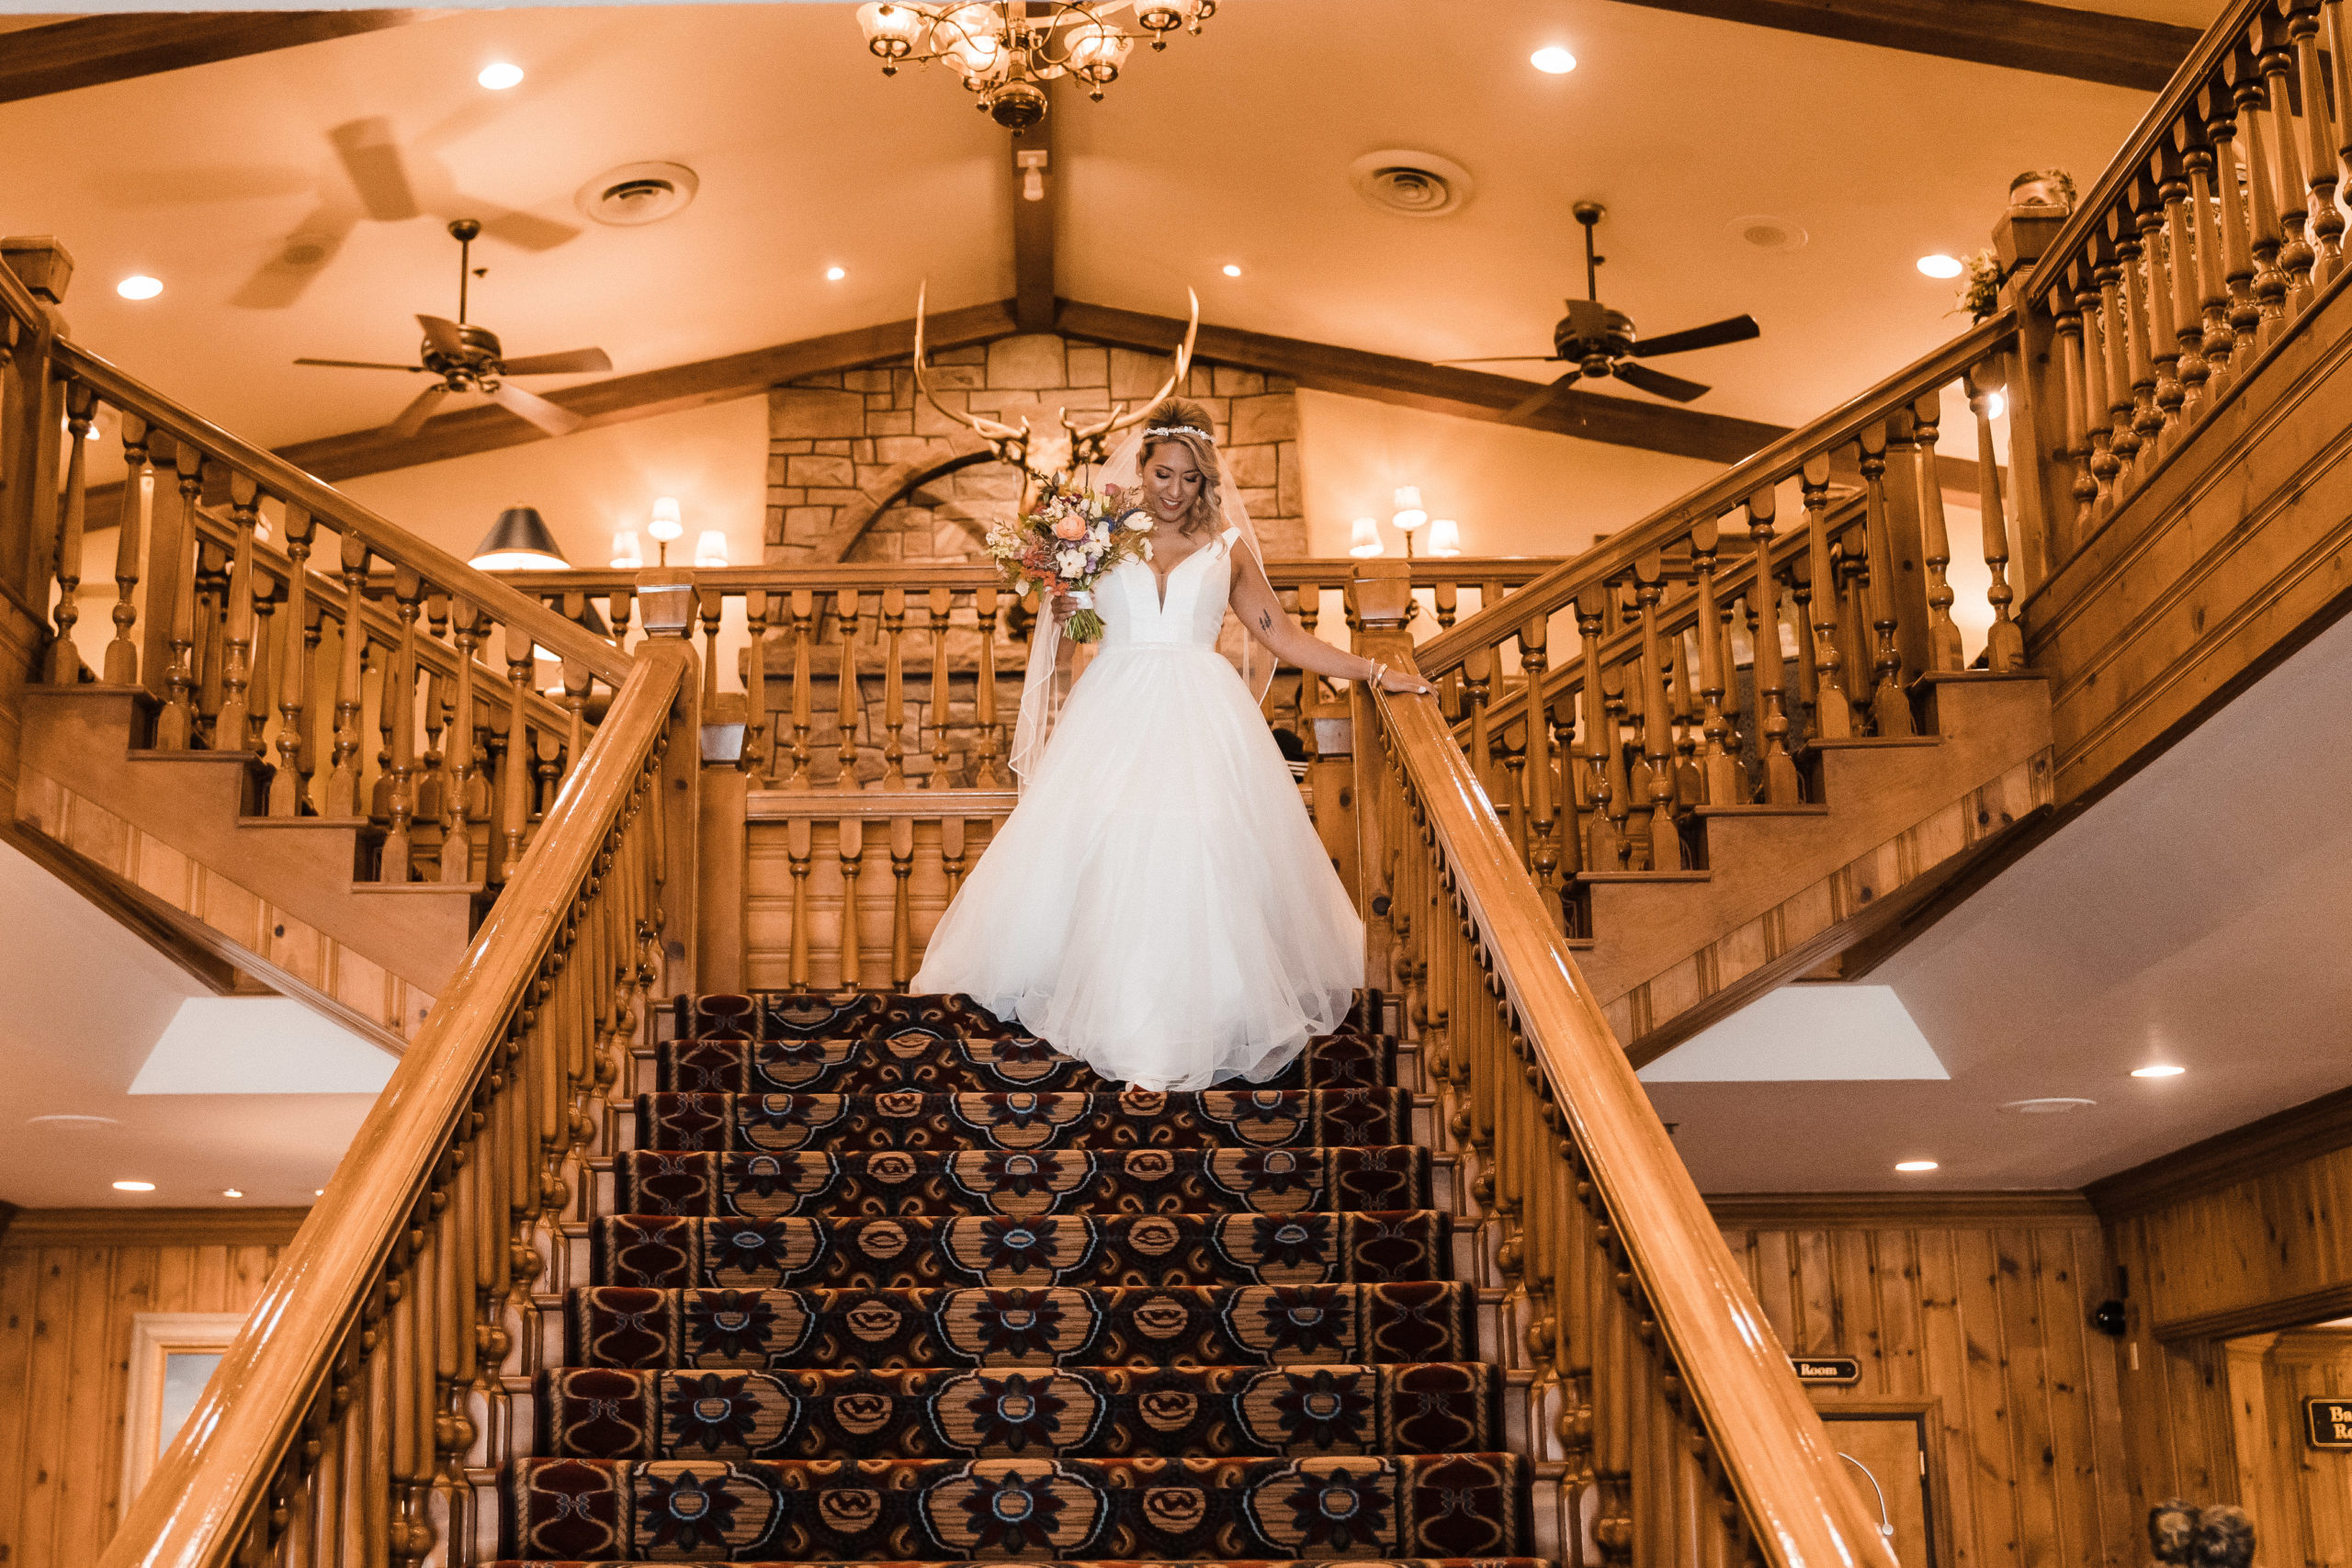 Bride walking down grand staircase at the Wort Hotel in Jackson Hole, Wyoming